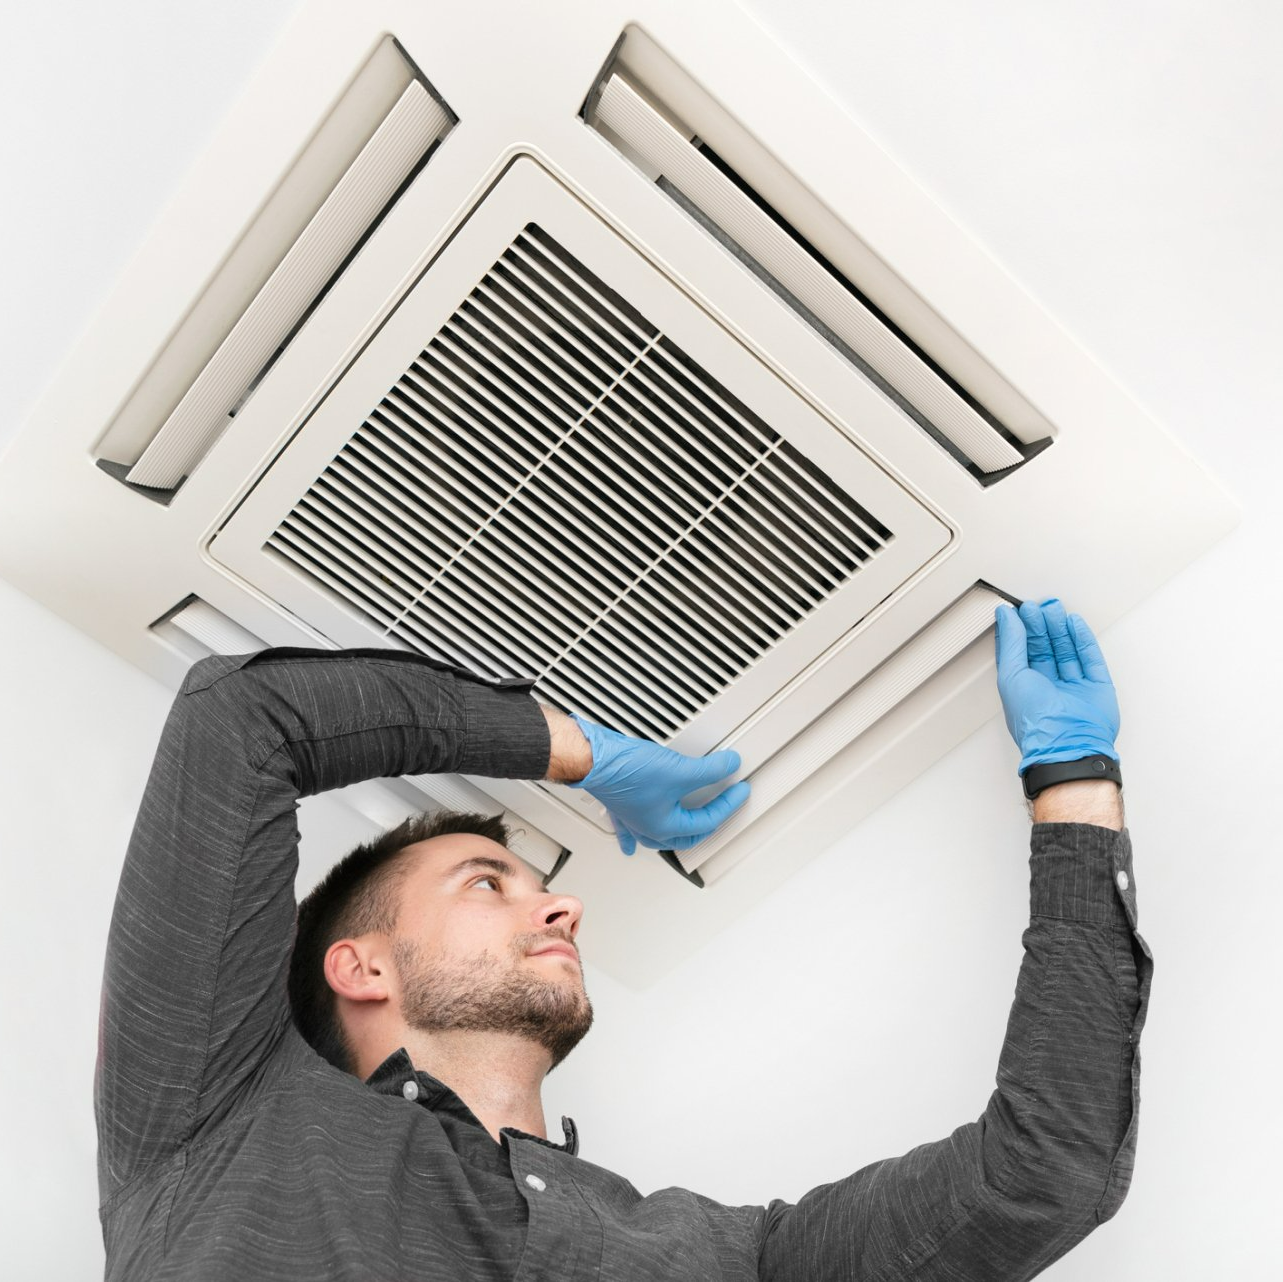 Man Closing the Heat and Cooling Airconditioner - Gosnells, WA - Evap Doctor